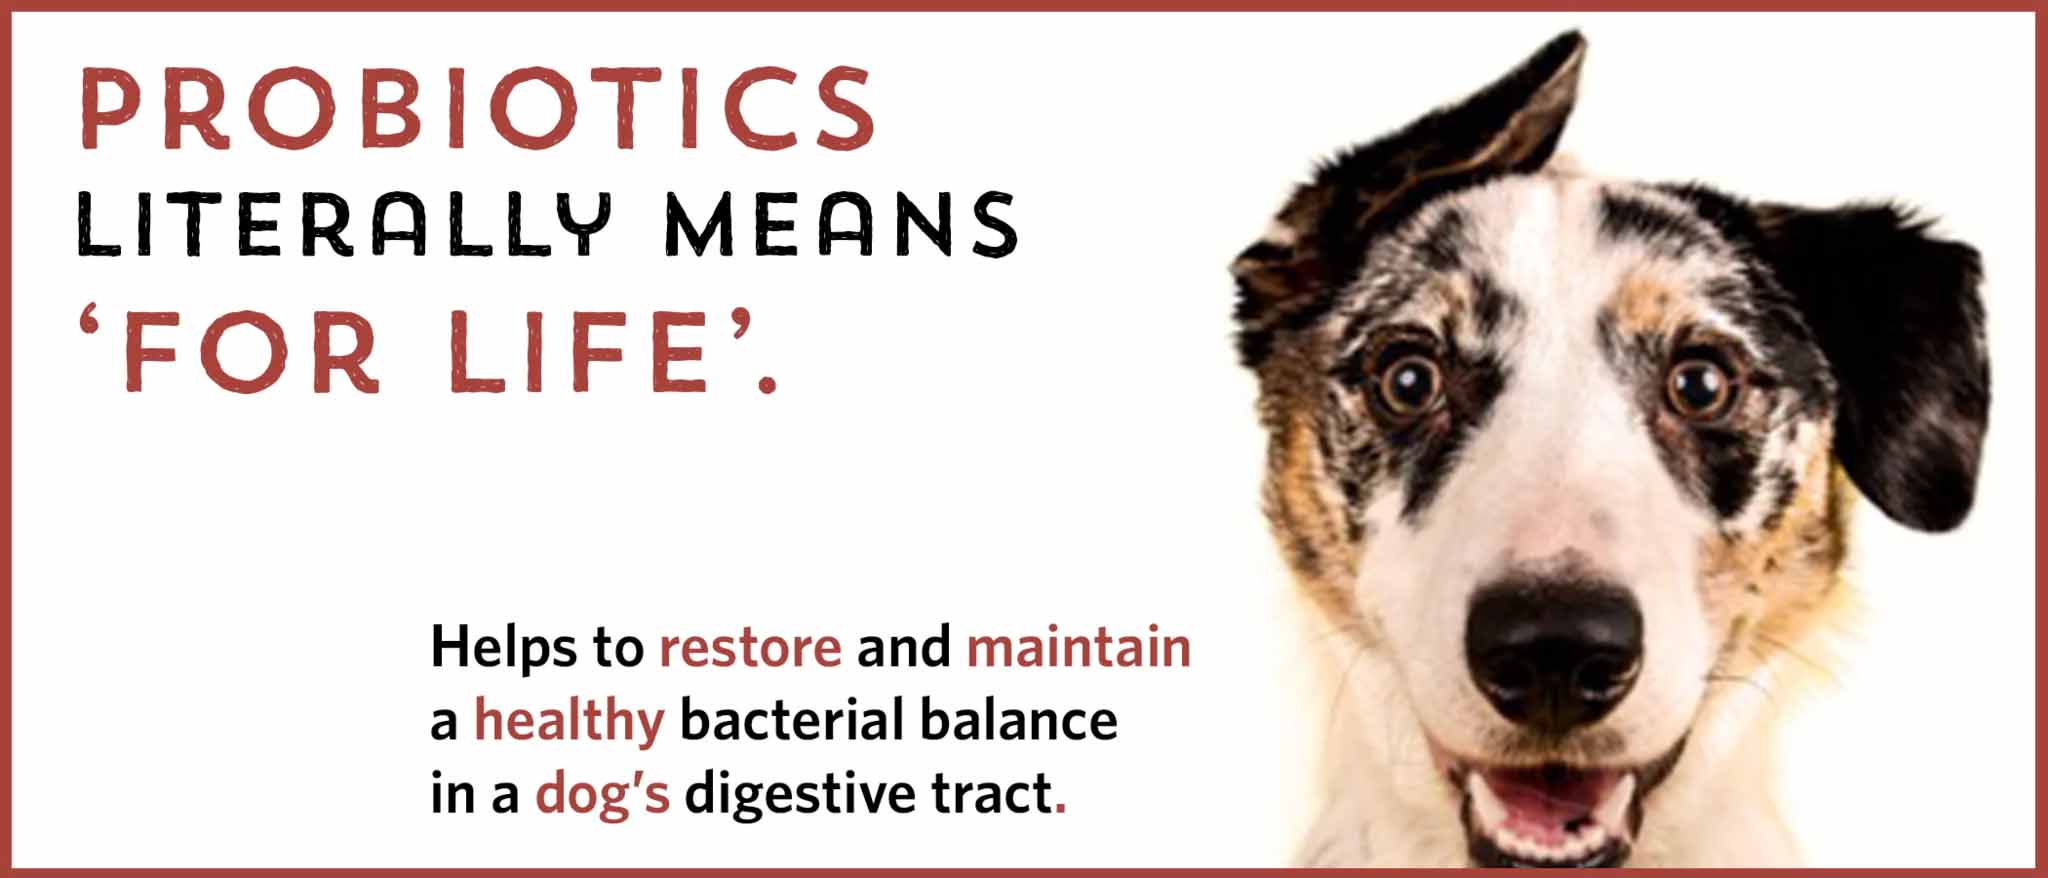 Probiotics means for life. Helps to restore and maintain a healthy bacterial balance in your dog's digestive tract.